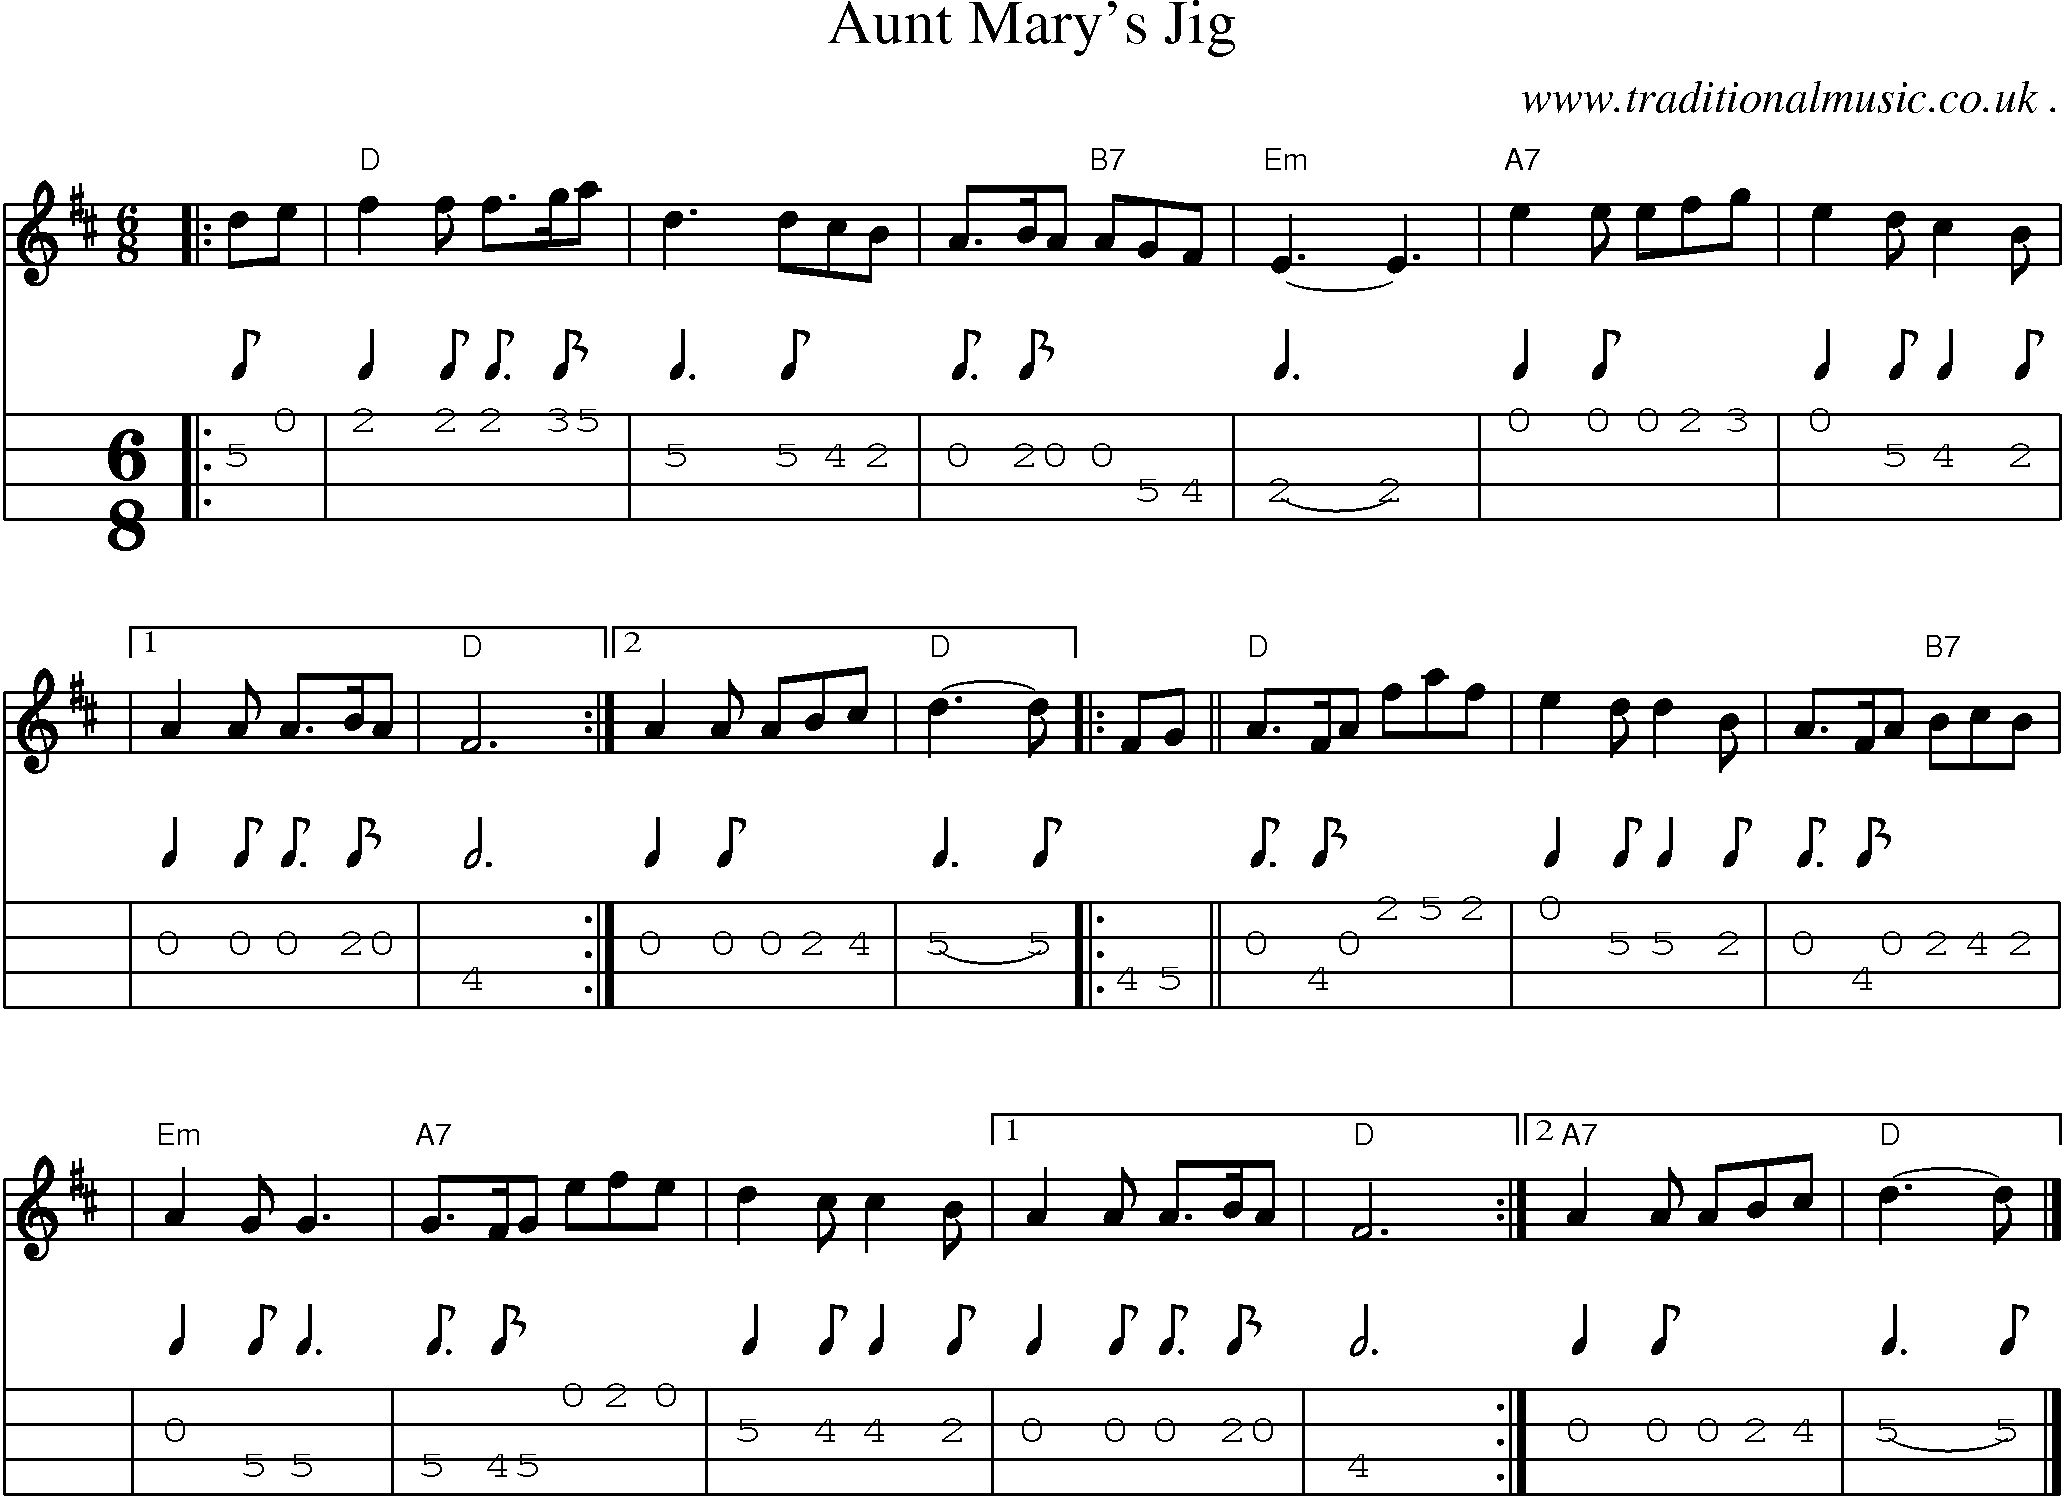 Sheet-music  score, Chords and Mandolin Tabs for Aunt Marys Jig